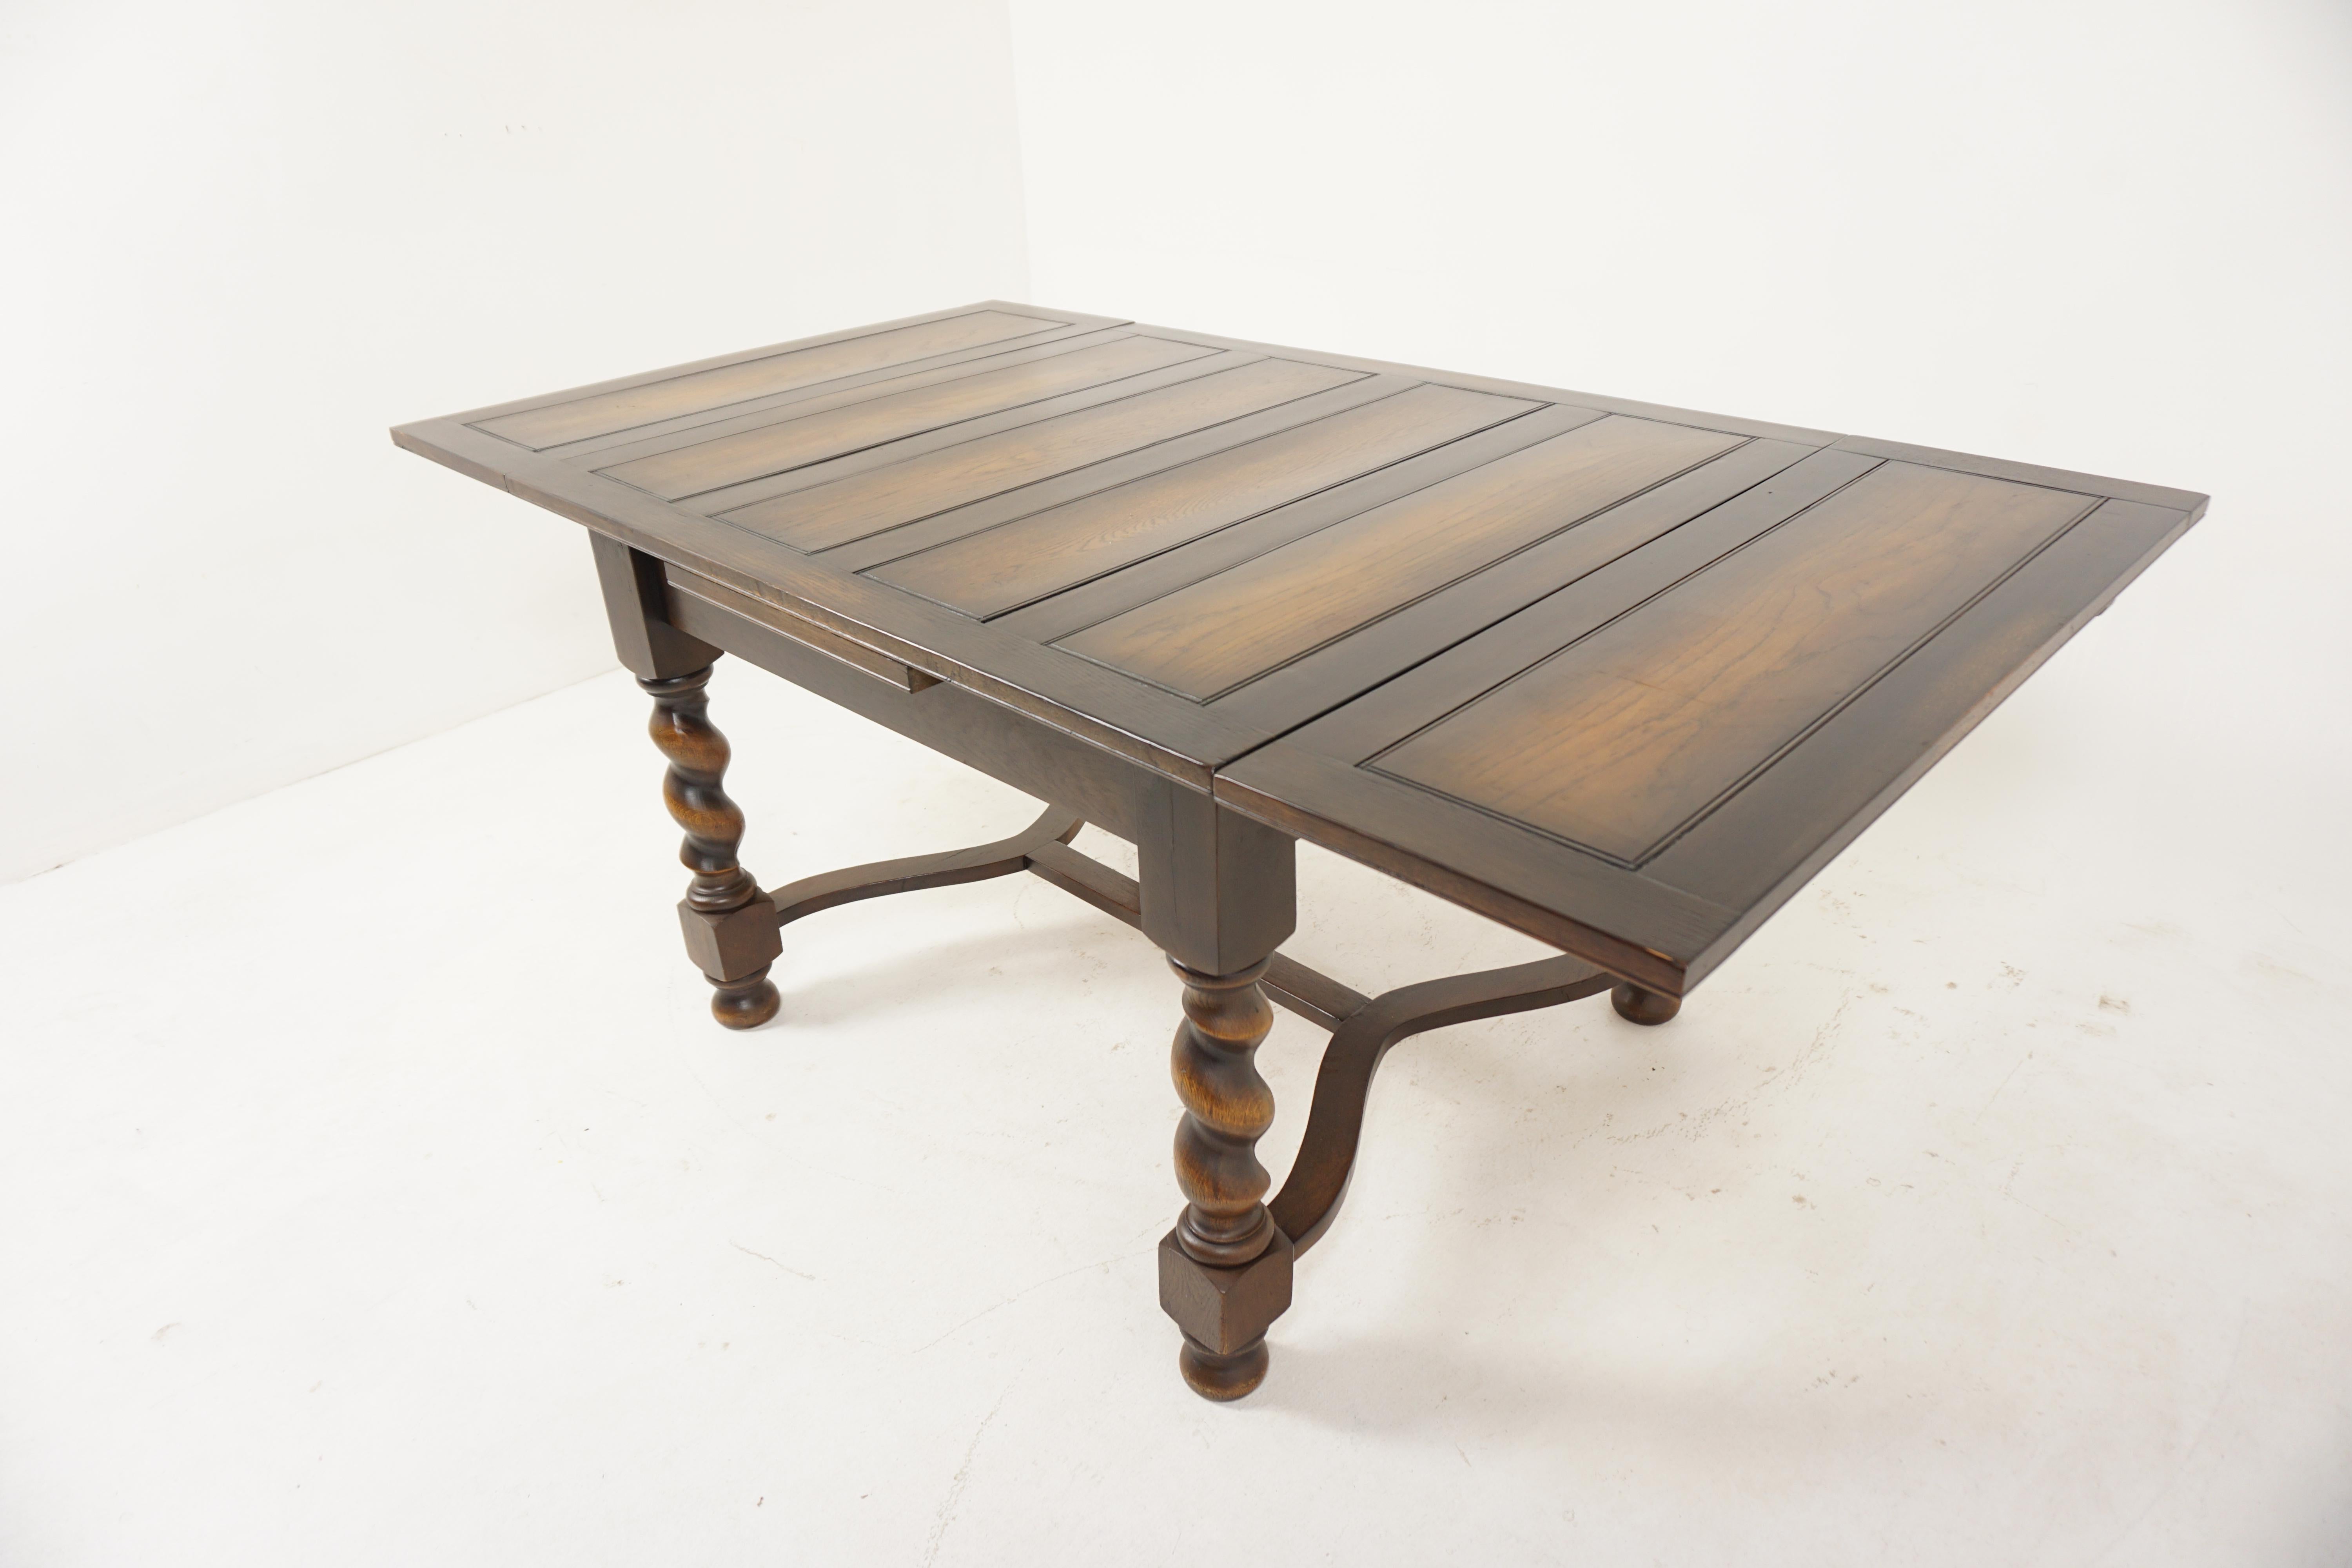 Antique Barley twist oak draw leaf, pull out dining table, Scotland 1920, B2919

Scotland 1920
Solid oak
Original finish
Solid oak Paneled top with a pair of pull out leaves on the ends
Table extends by 28